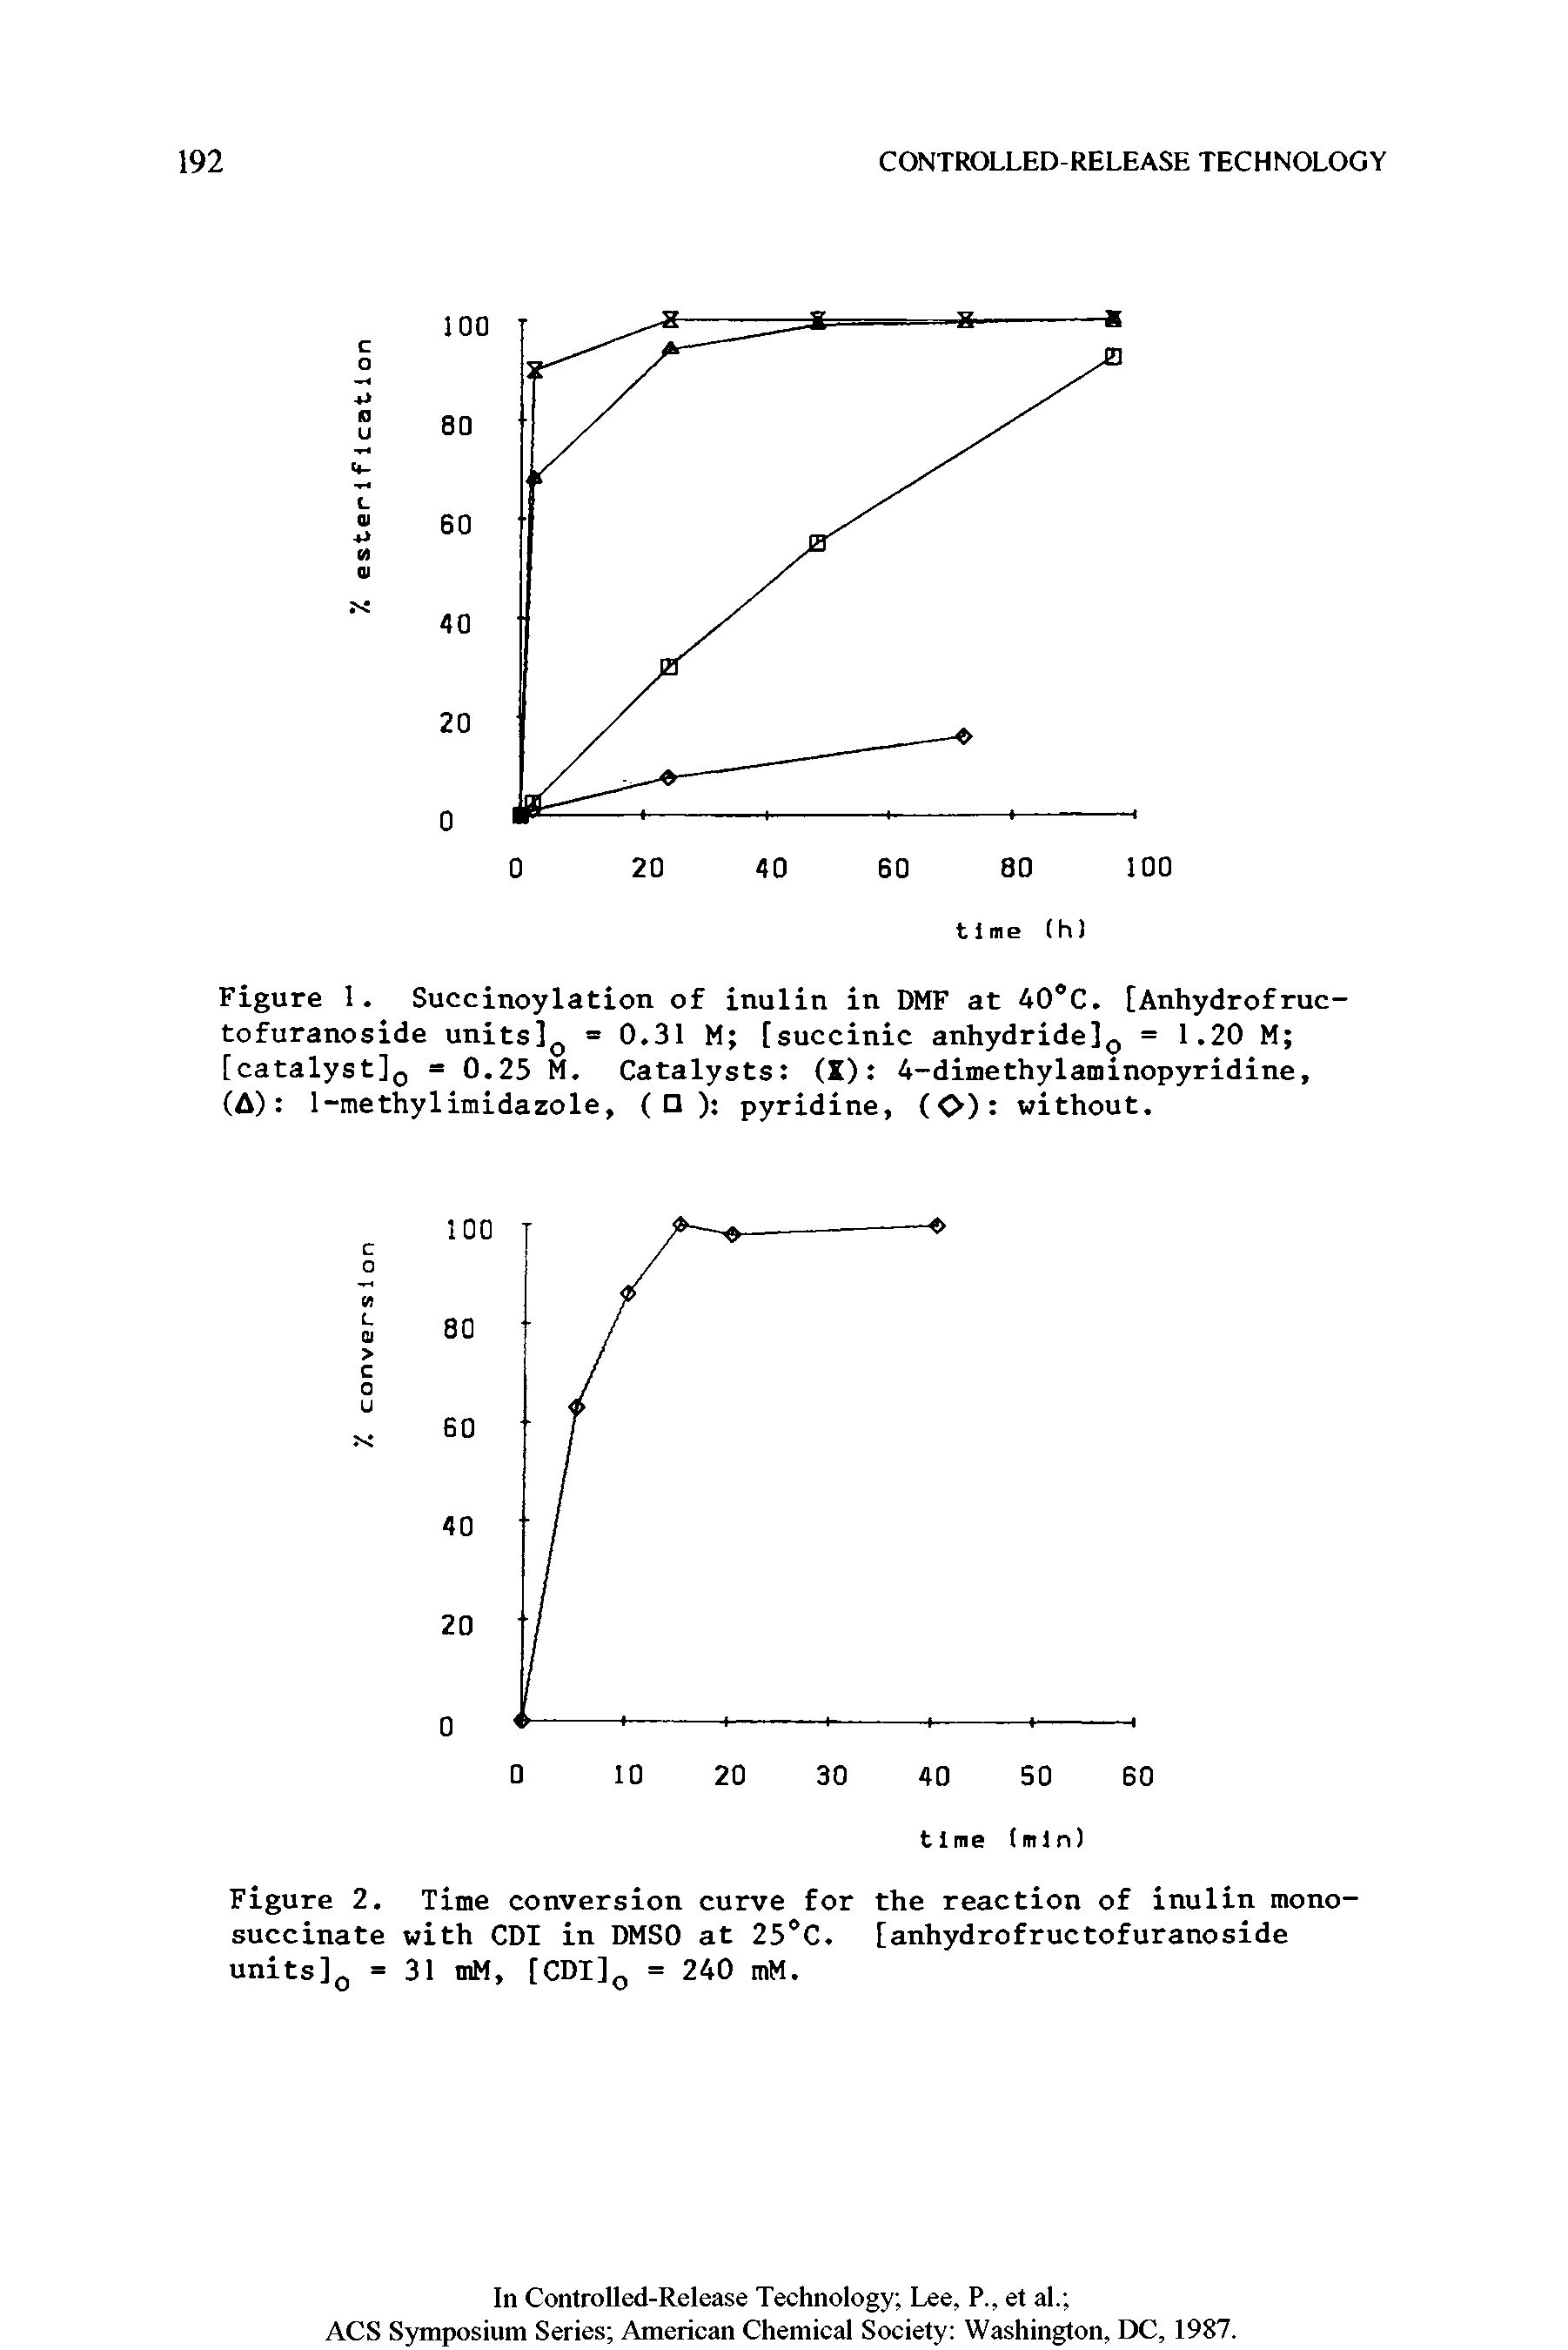 Figure 2. Time conversion curve for the reaction of inulin monosuccinate with CDI in DMSO at 25°C. [anhydrofructofuranoside units]0 = 31 mM, [CDI]Q = 240 mM.